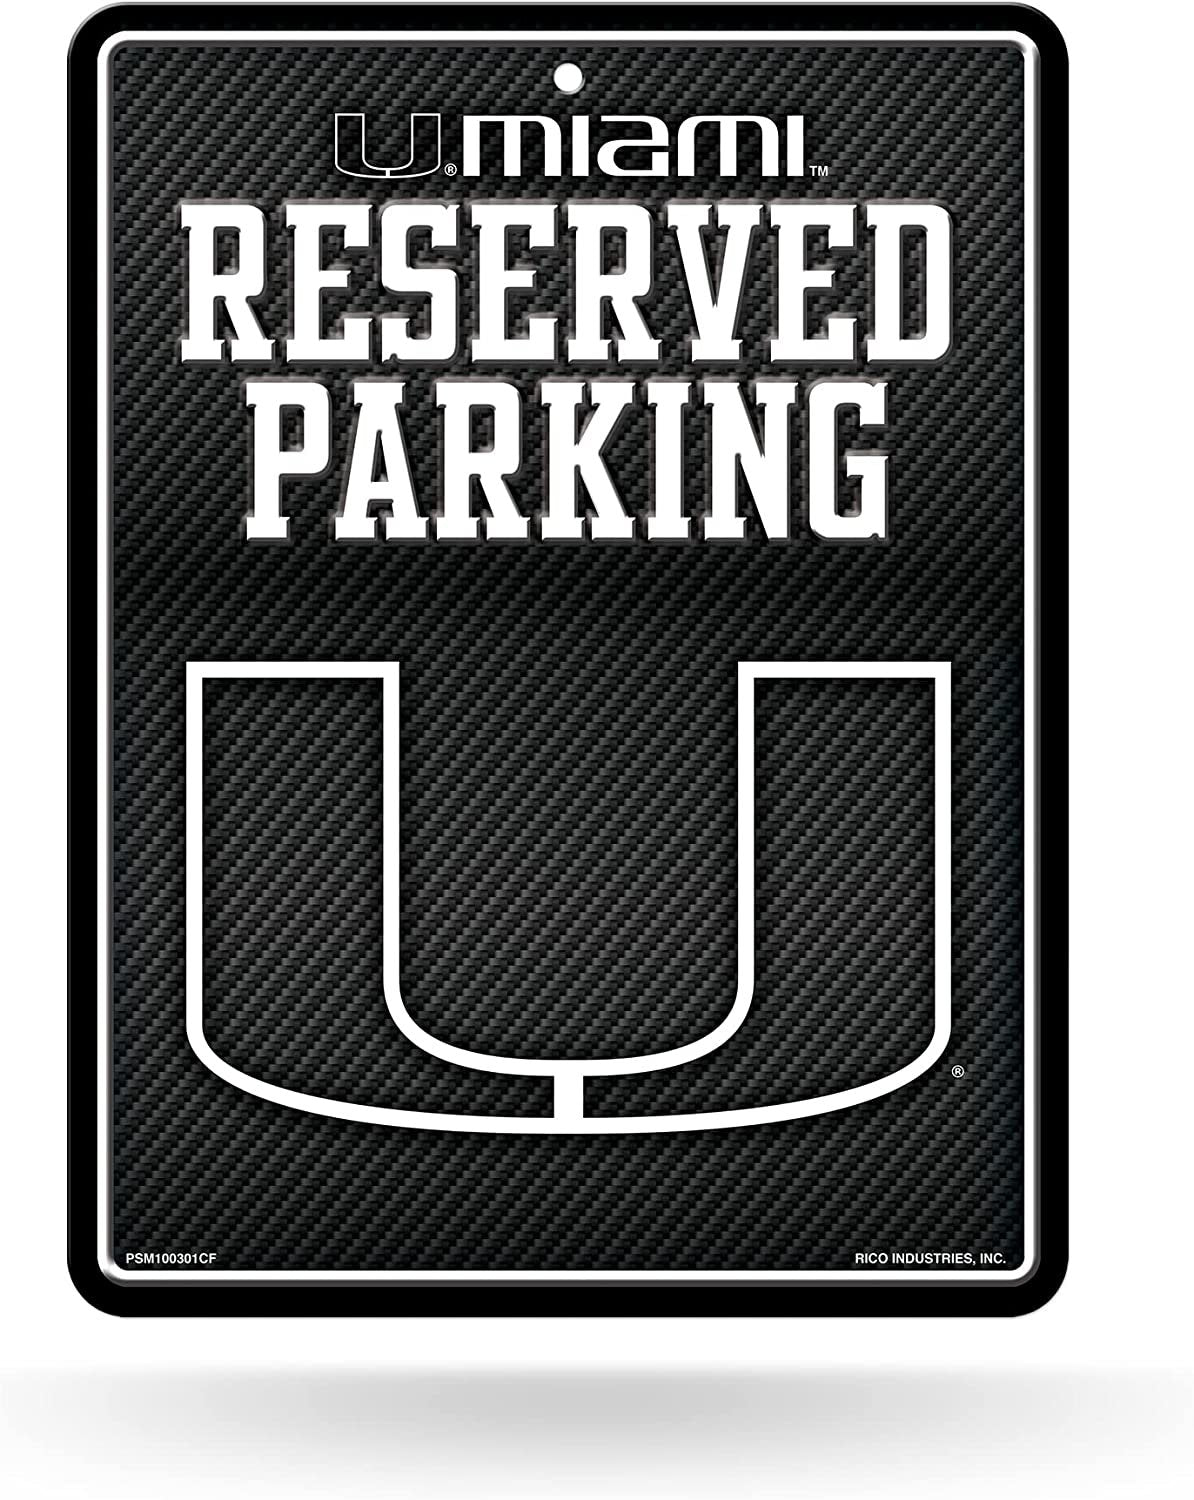 University of Miami Hurricanes Metal Parking Novelty Wall Sign 8.5 x 11 Inch Carbon Fiber Design